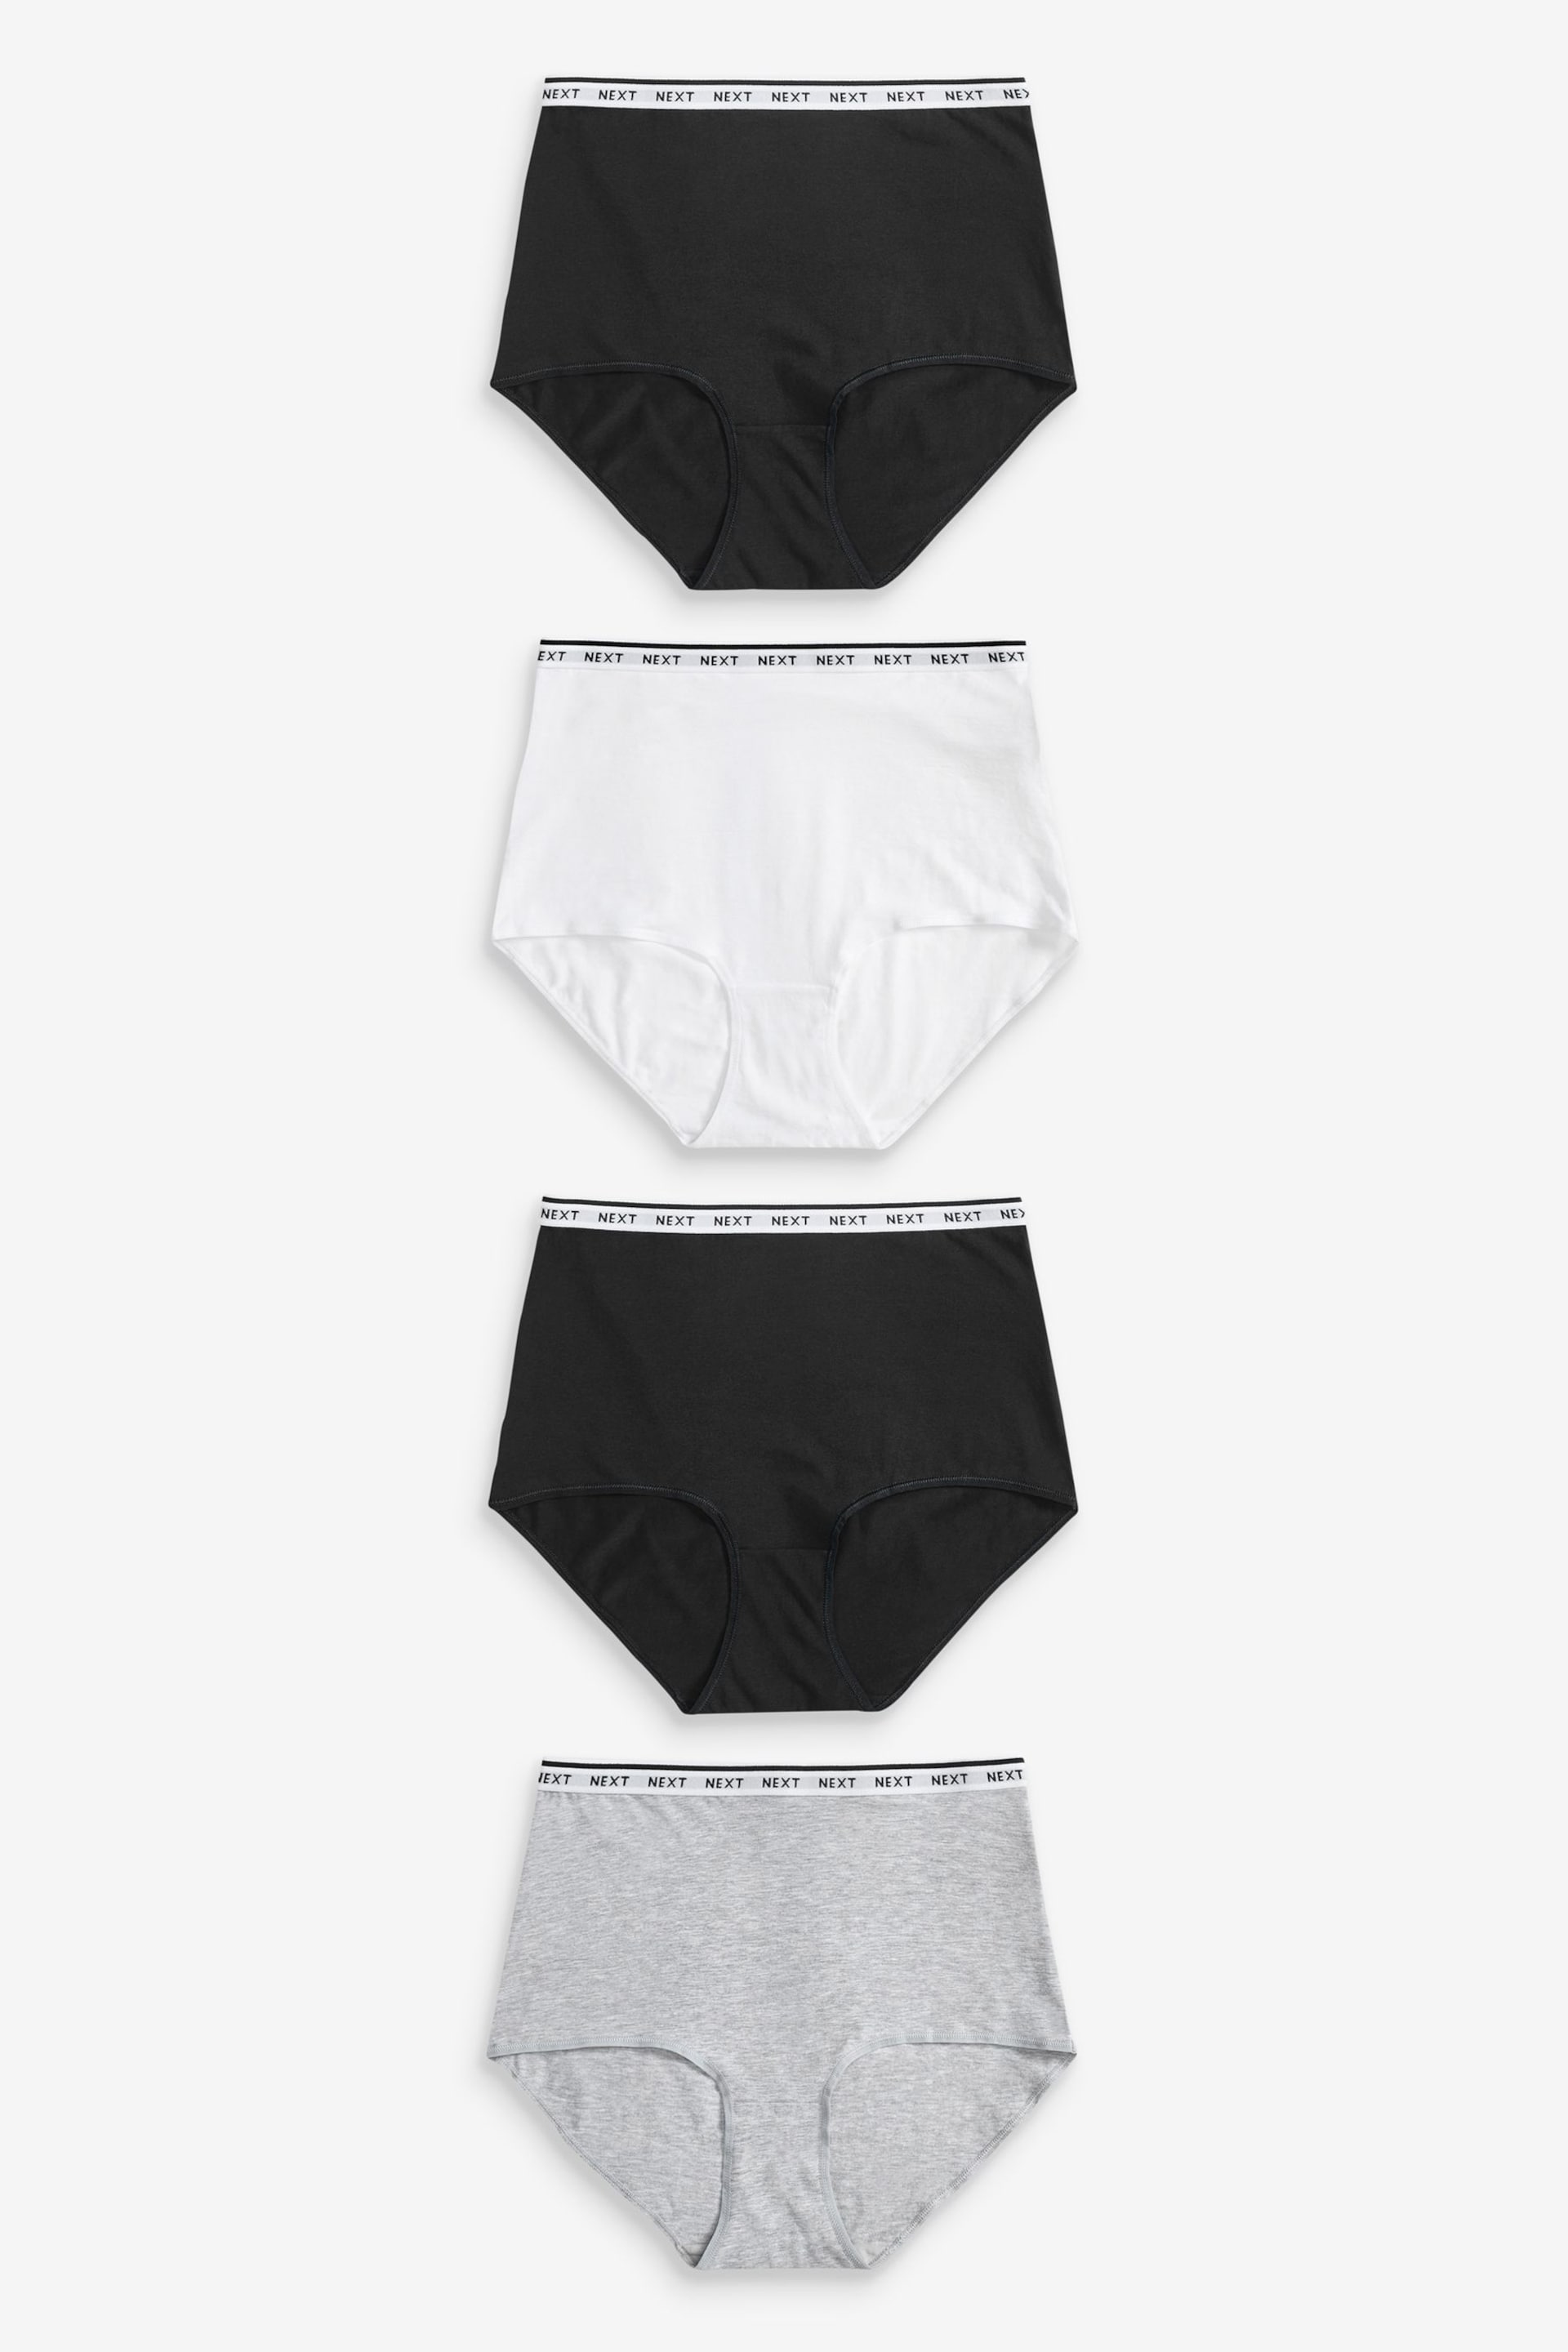 White/Black/Grey Full Brief Cotton Rich Logo Knickers 4 Pack - Image 1 of 7